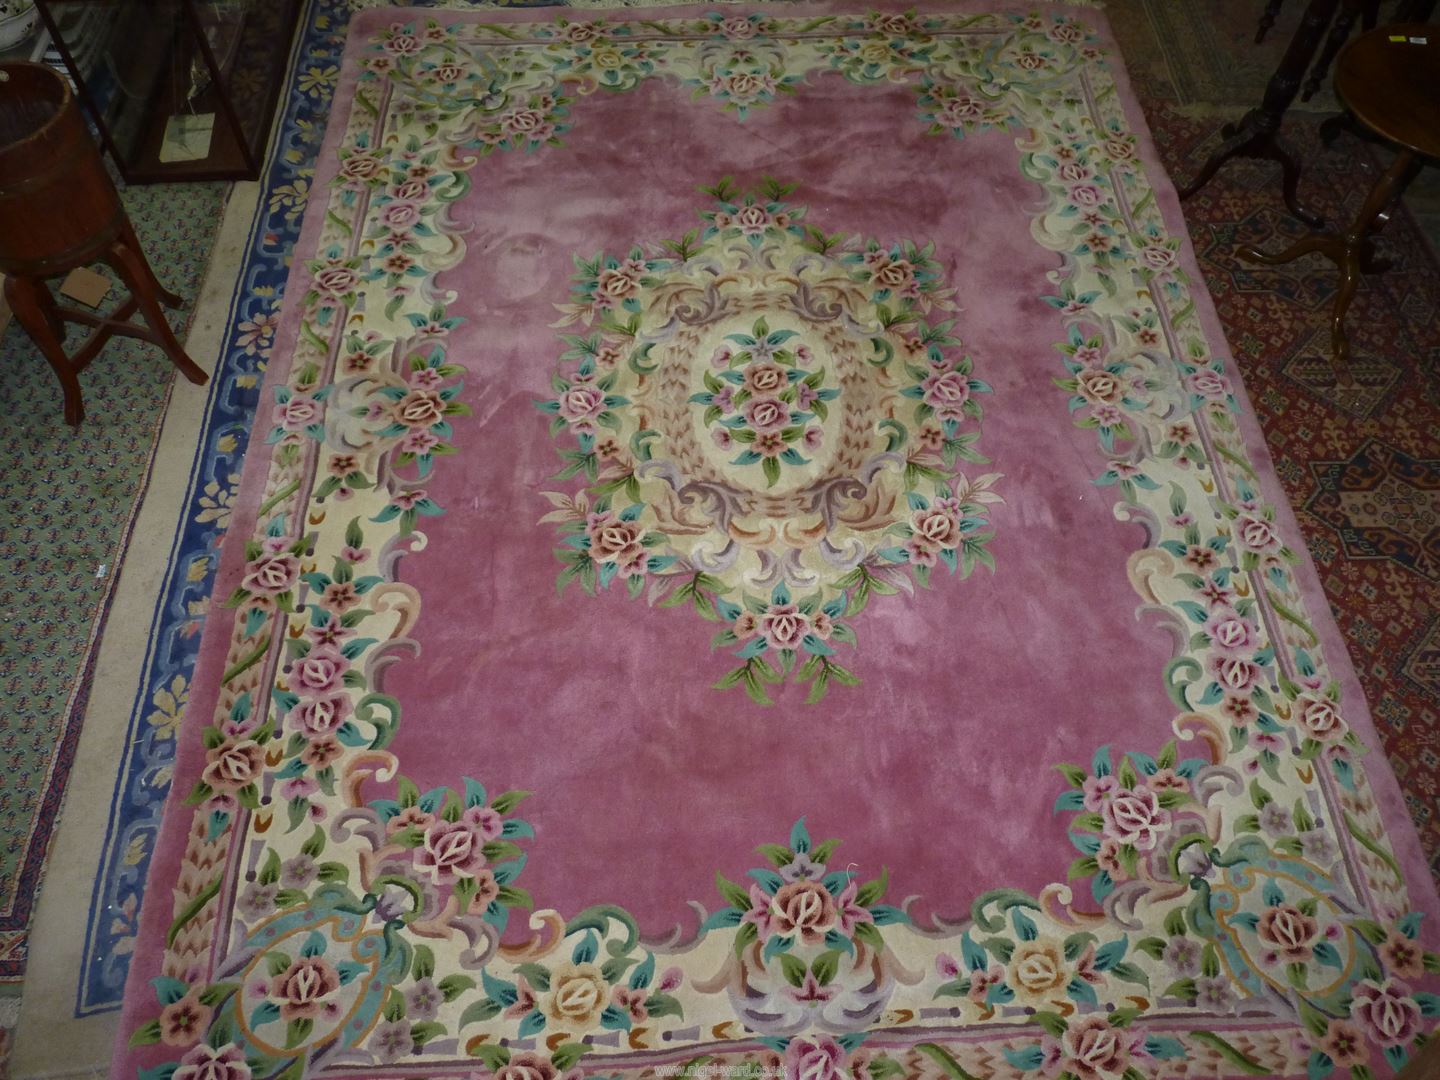 A large pink Chinese carpet, 140" long x 103 1/2'' wide.